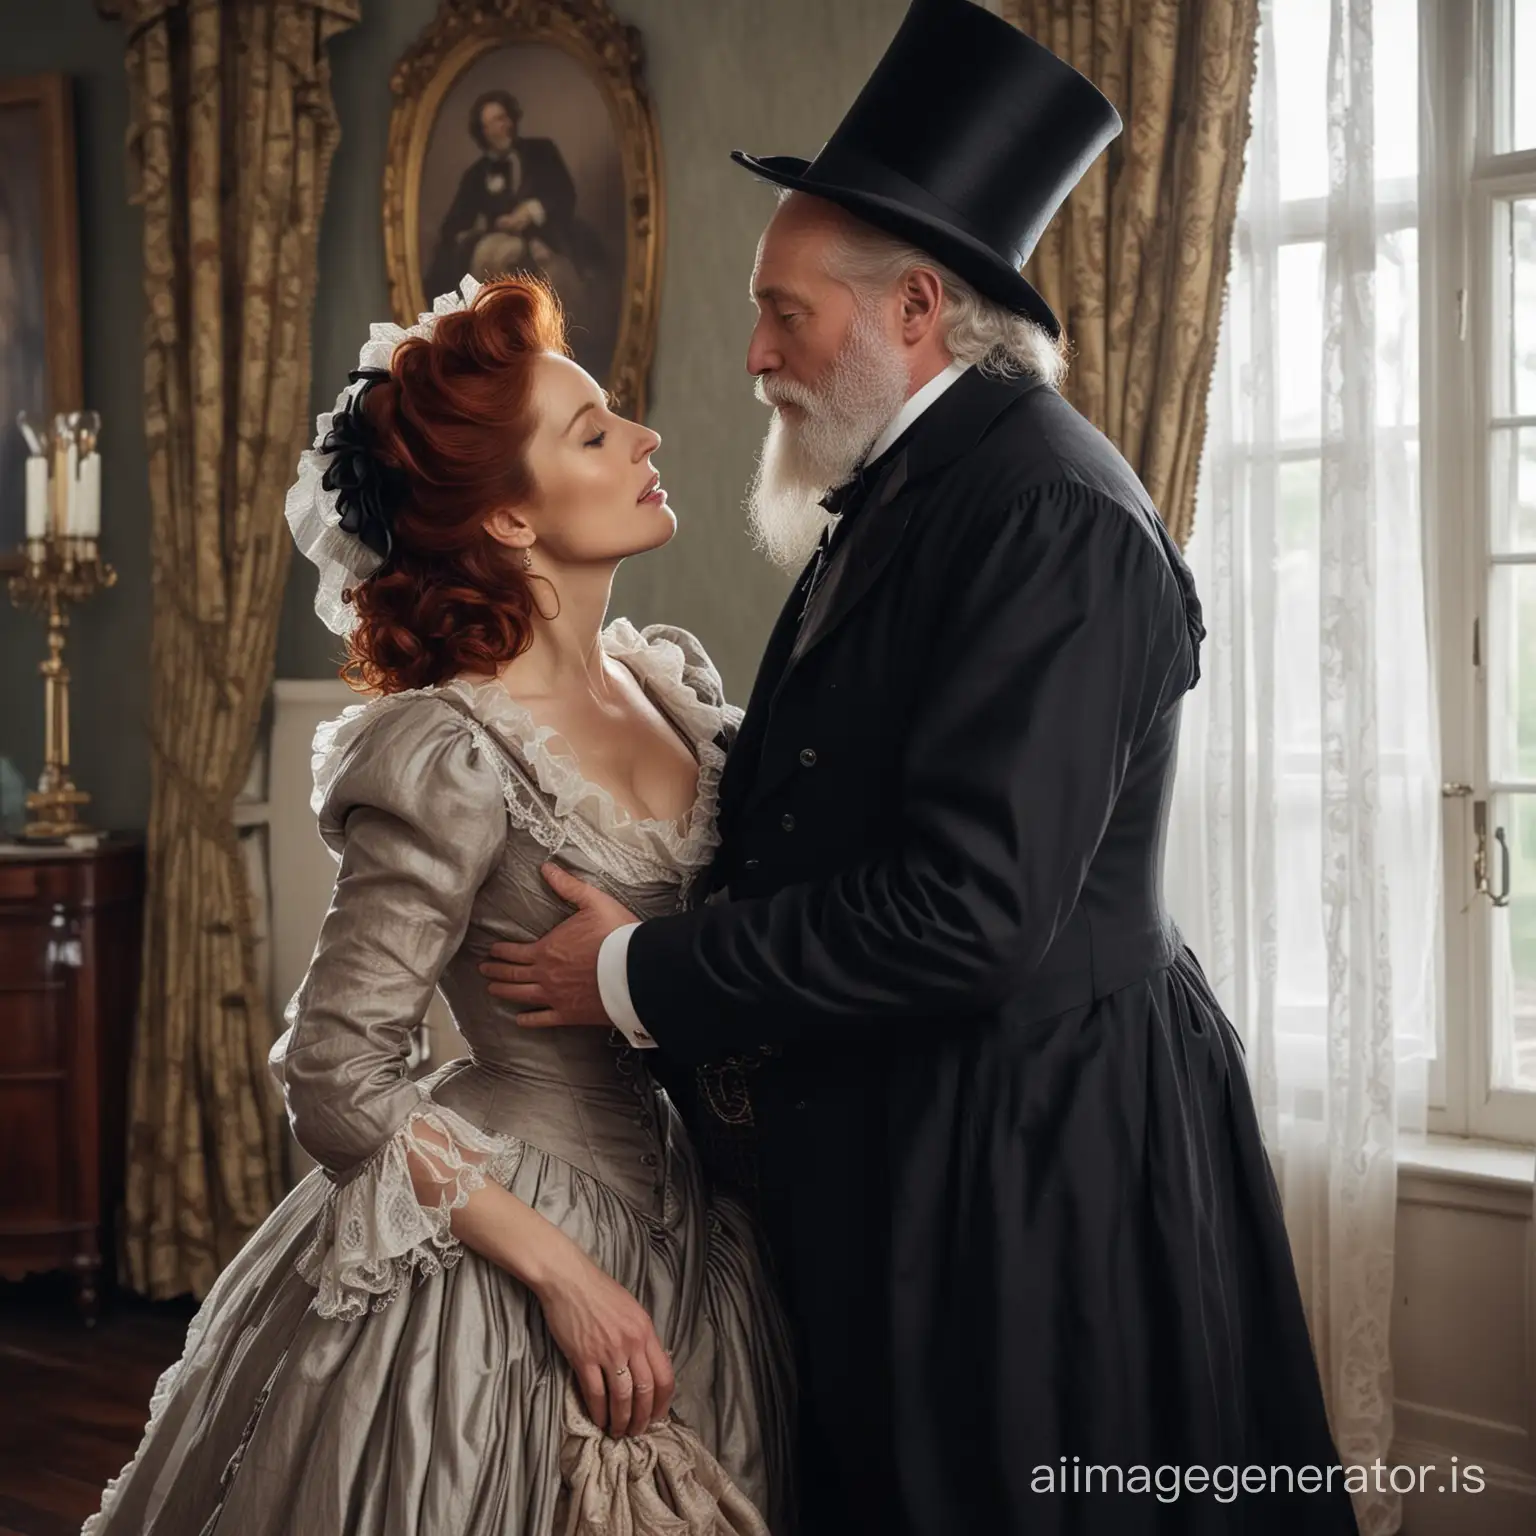 red hair Gillian Anderson wearing a dark brown floor-length loose billowing 1860 Victorian crinoline dress with a frilly bonnet kissing an old man dressed in a black Victorian suit who seems to be her newlywed husband